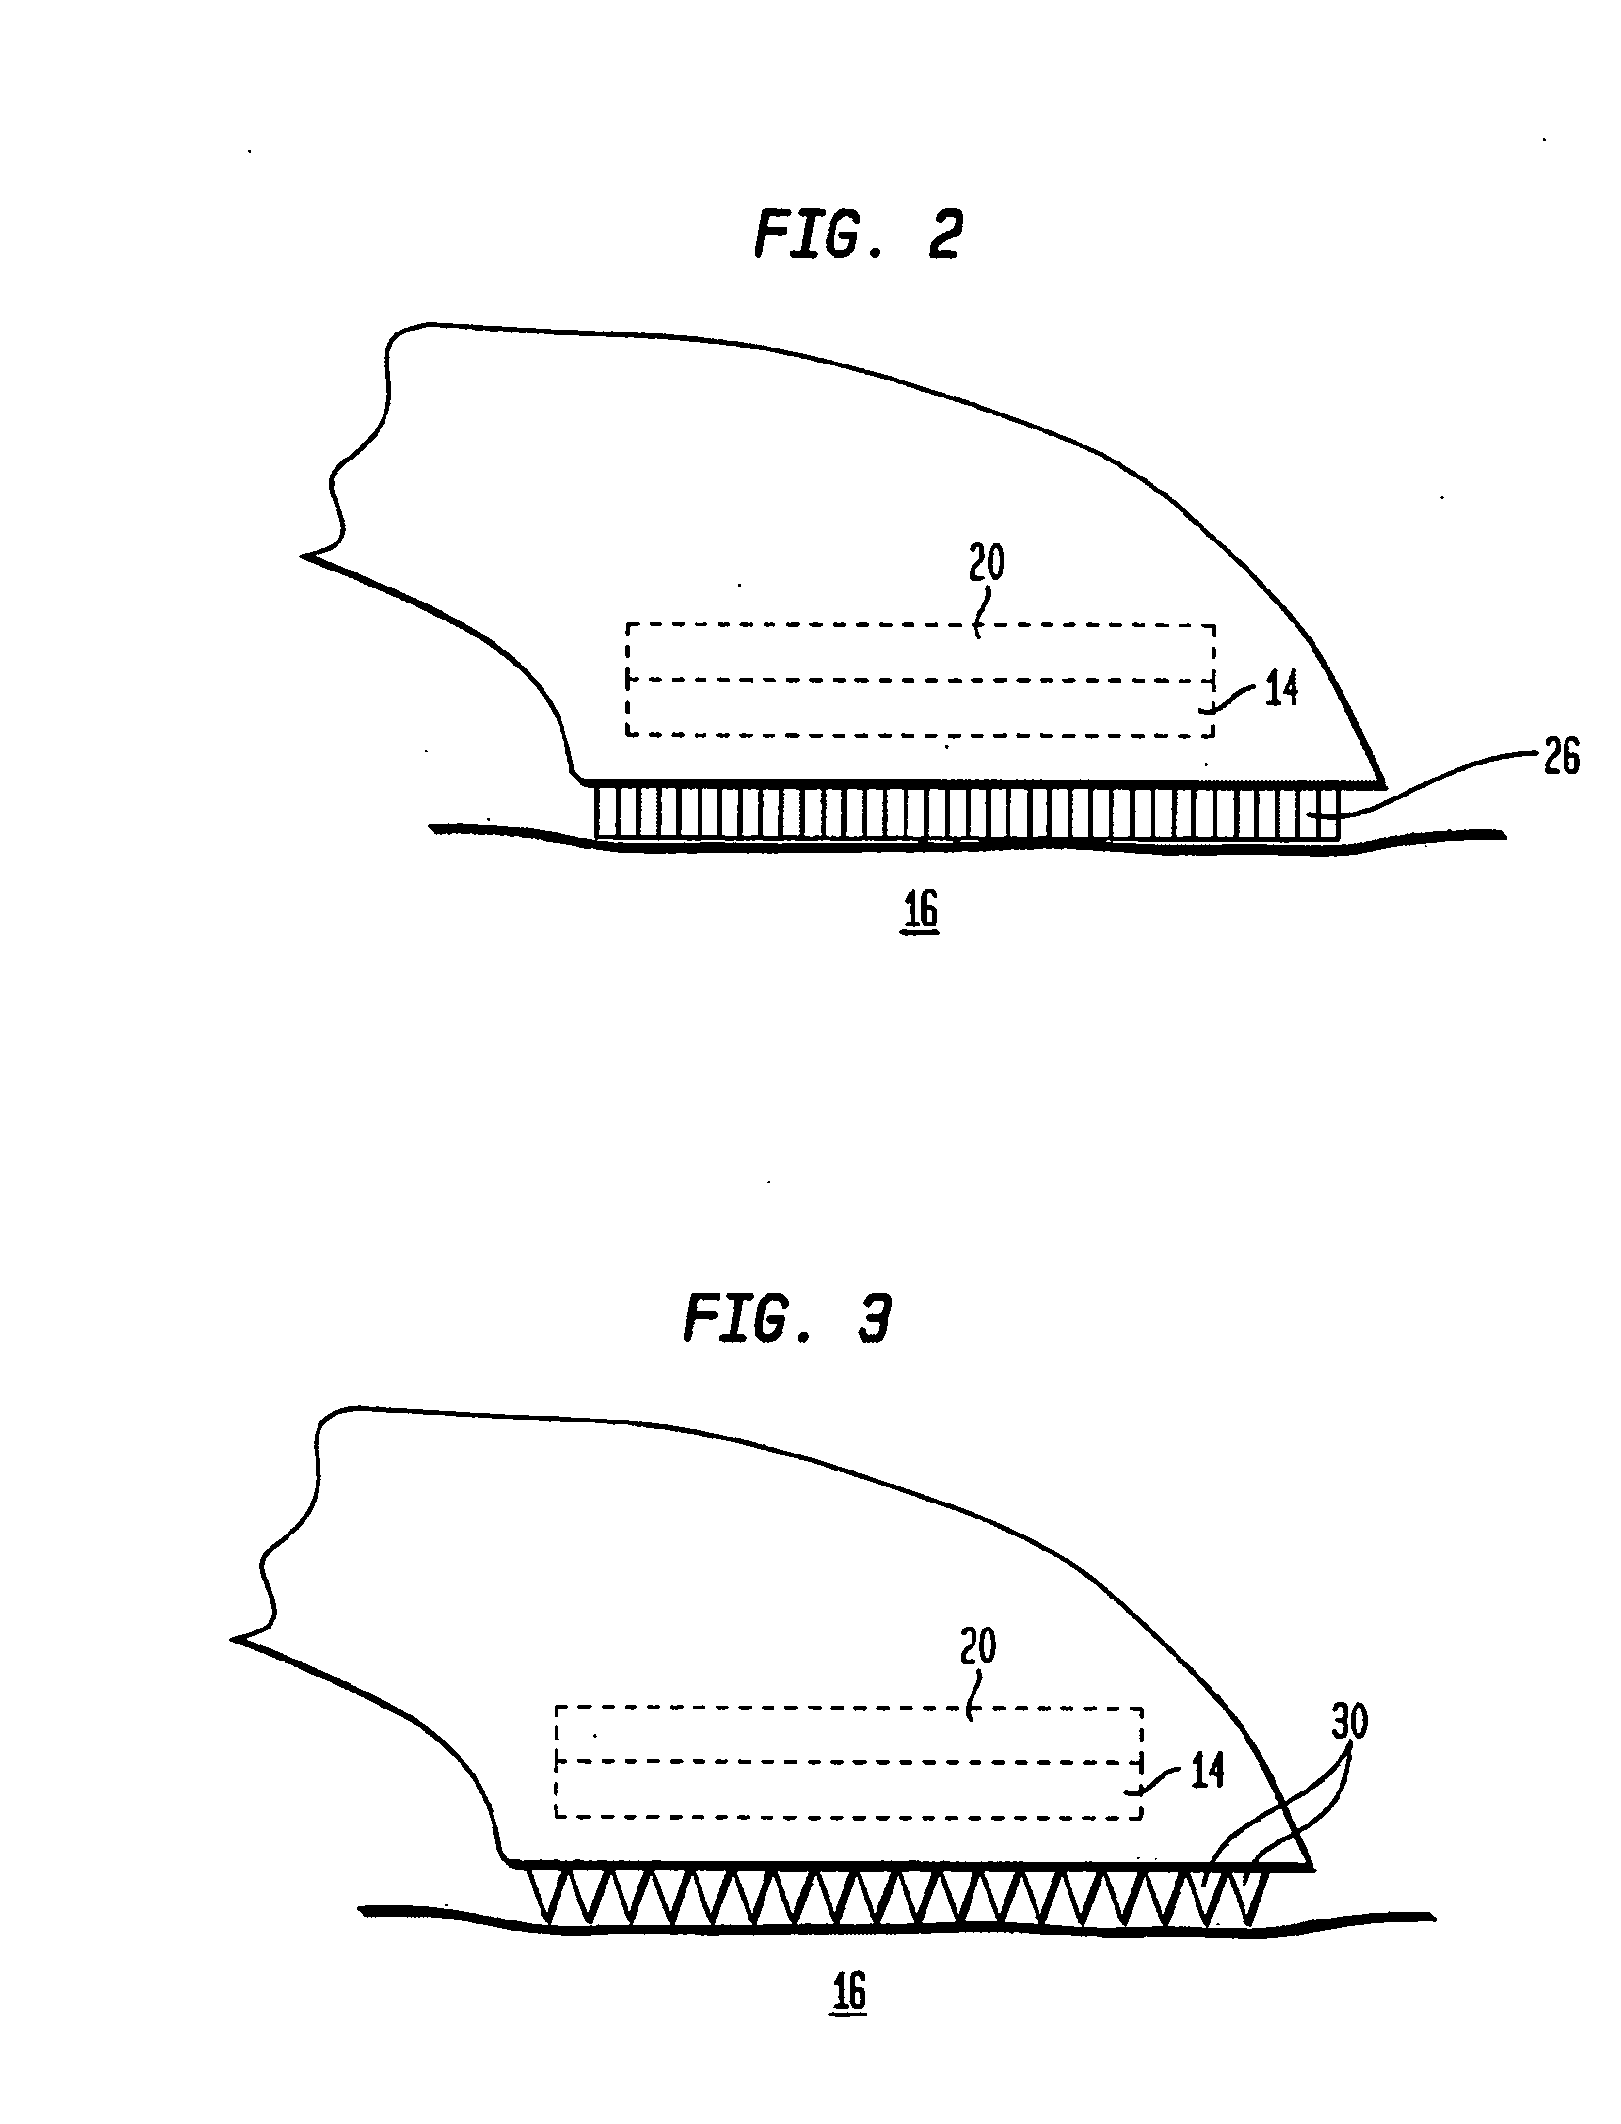 Methods and apparatus for delivering low power optical treatments